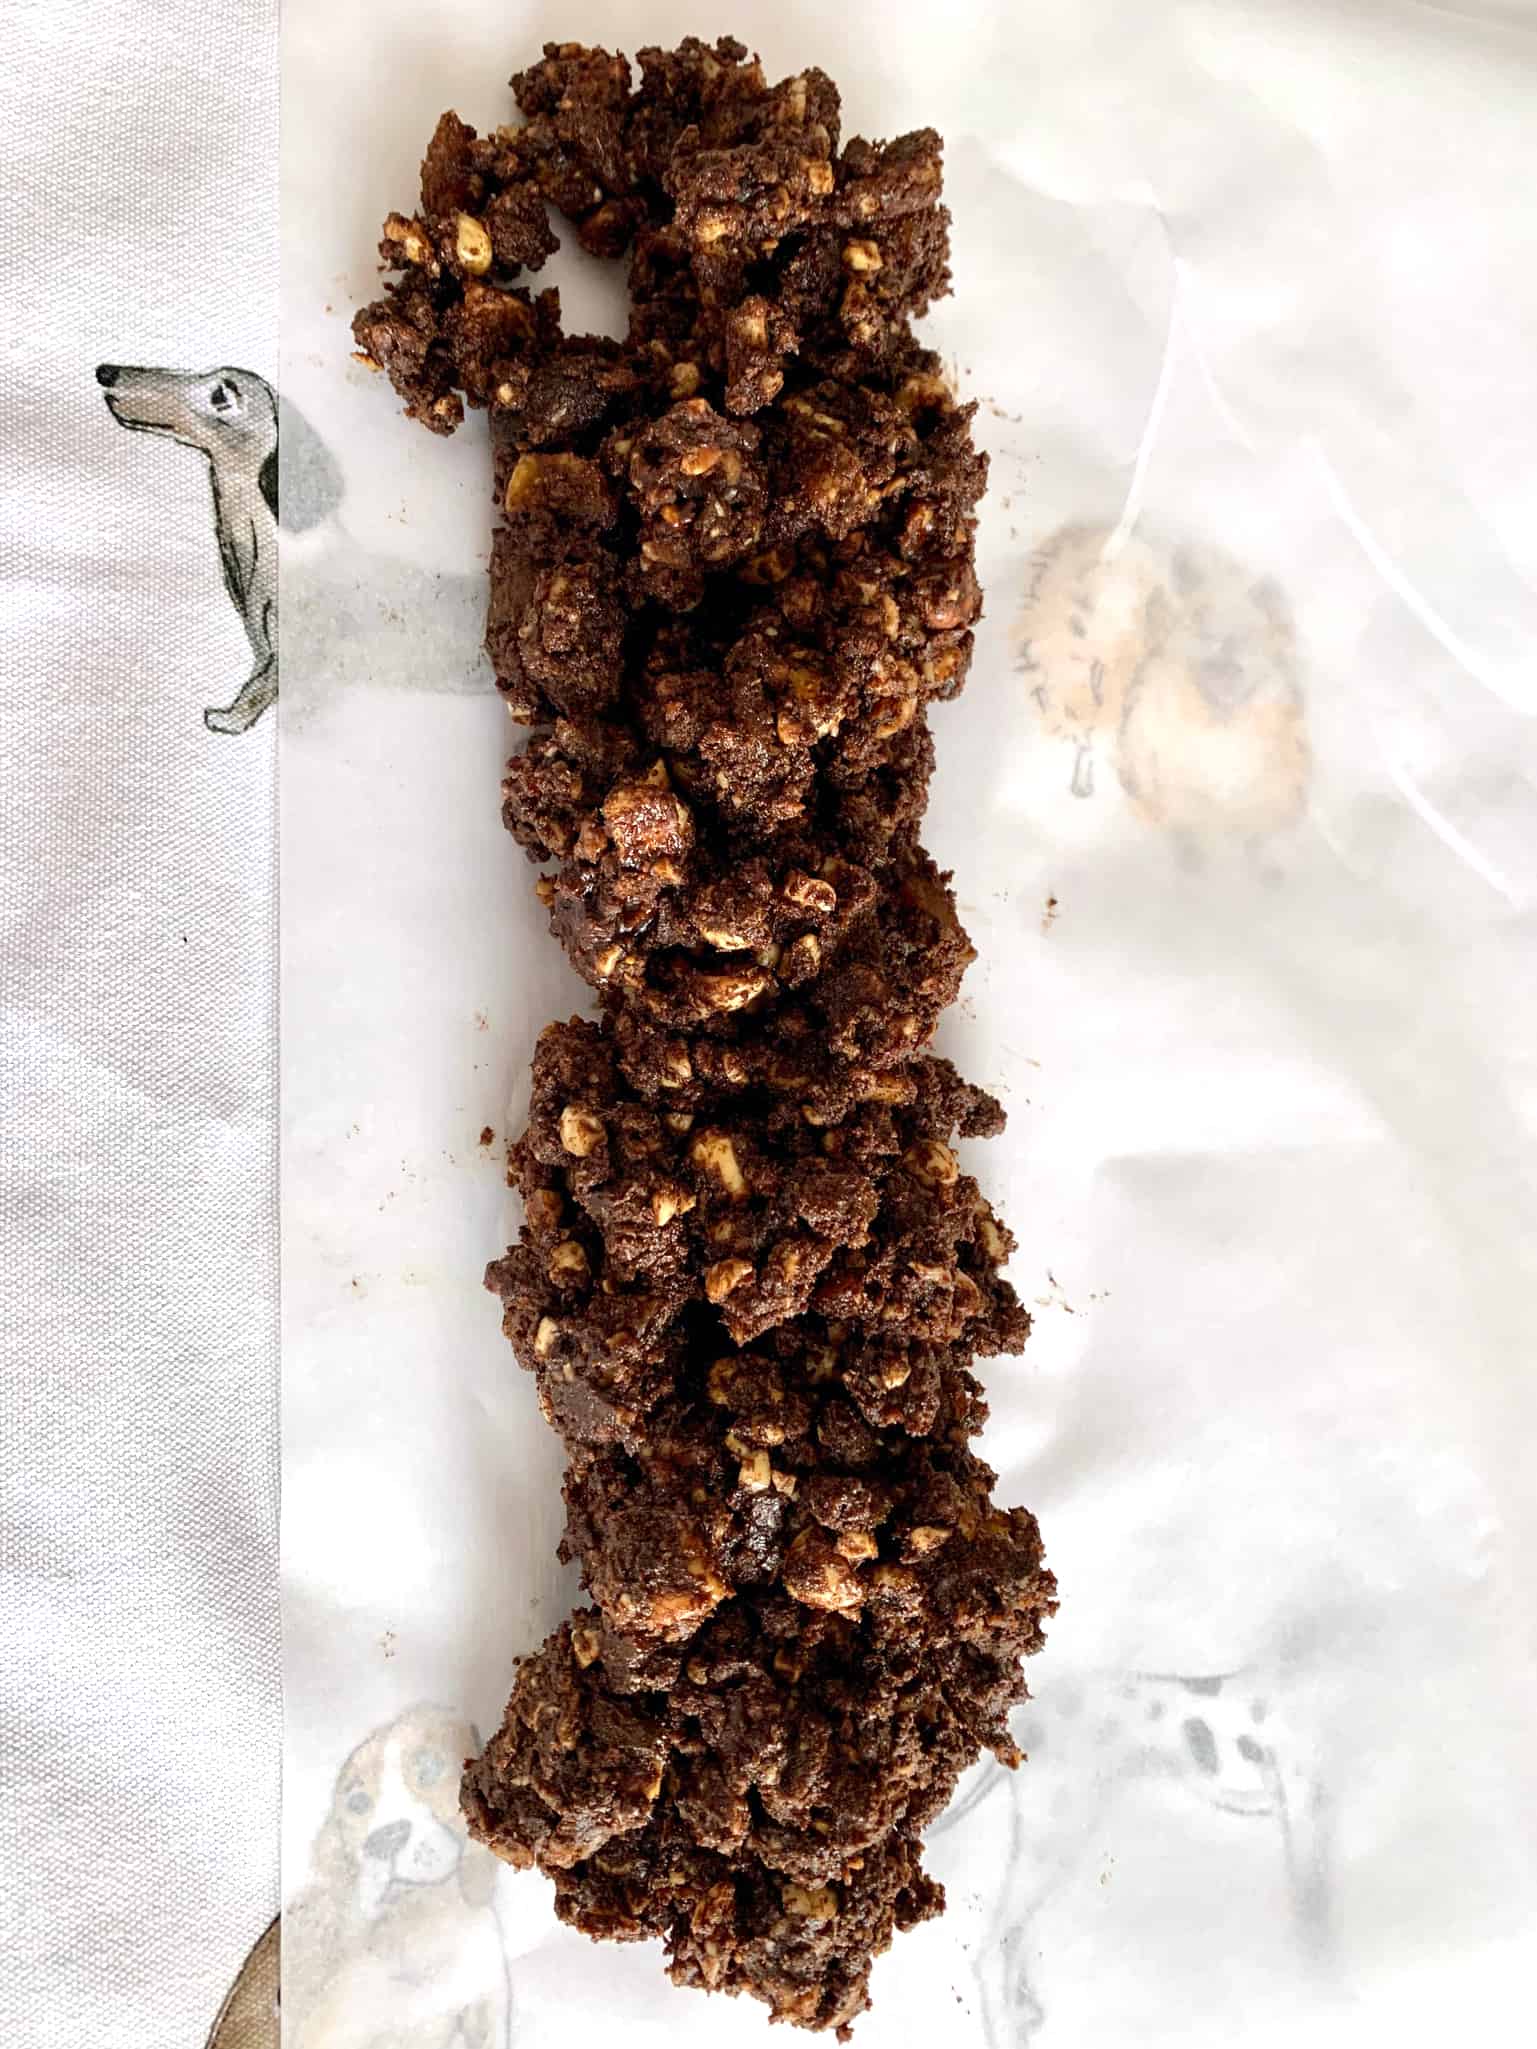 Greek Style Chocolate Salami with Dried Fruits and Nuts (Kormos) ready to roll